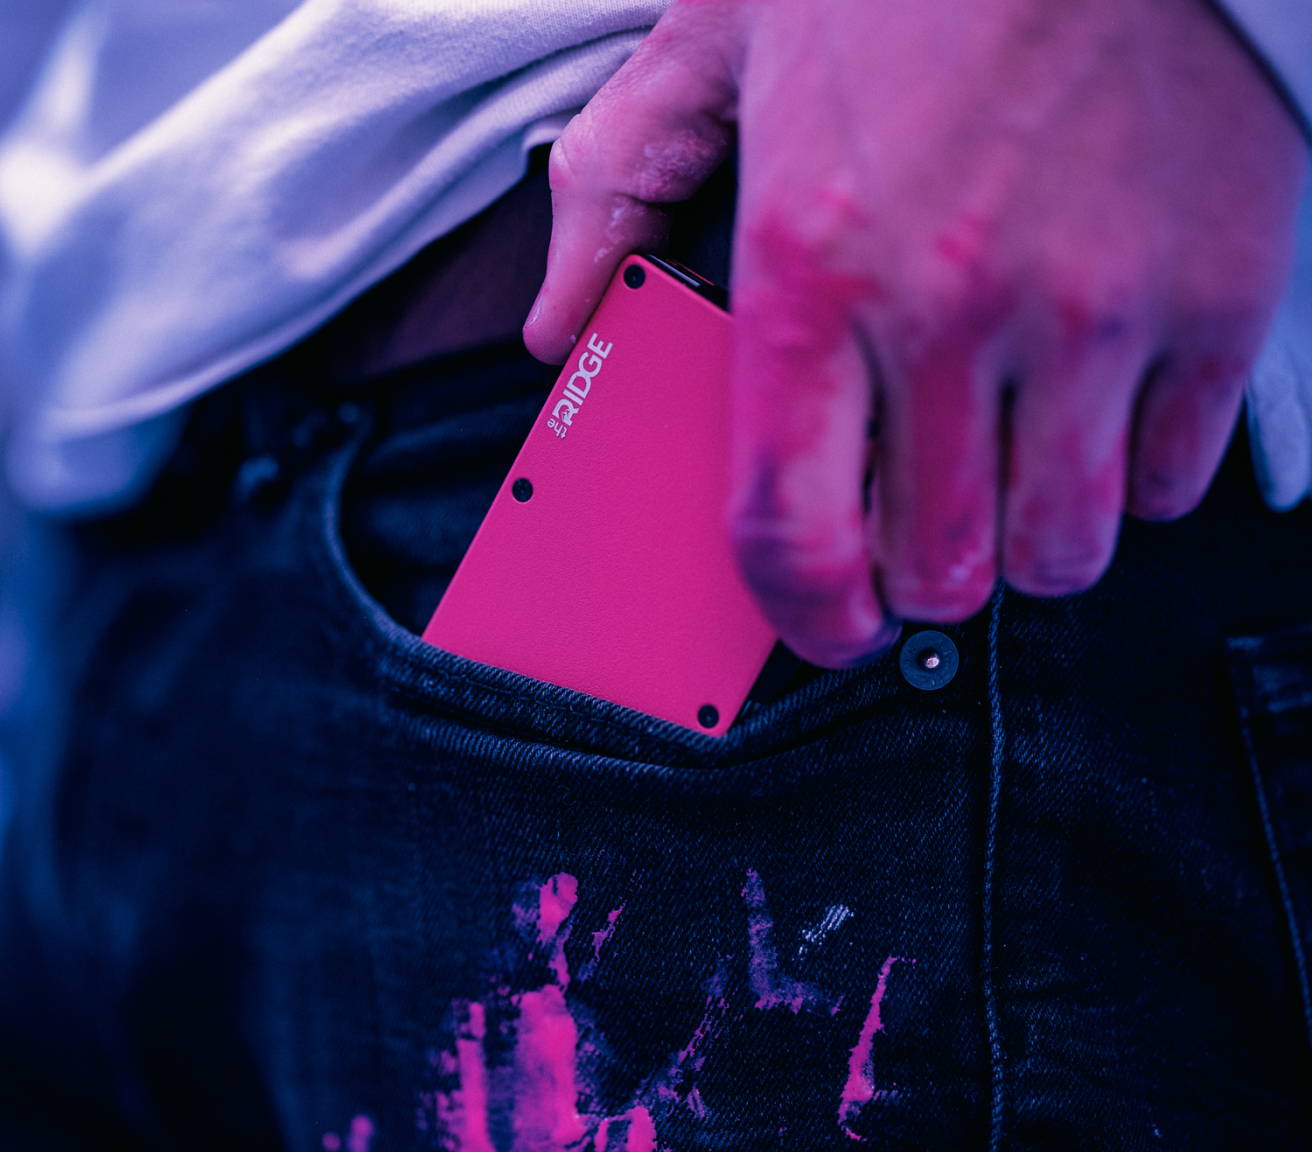 Flamingo Pink Ridge wallet picked out of pocket